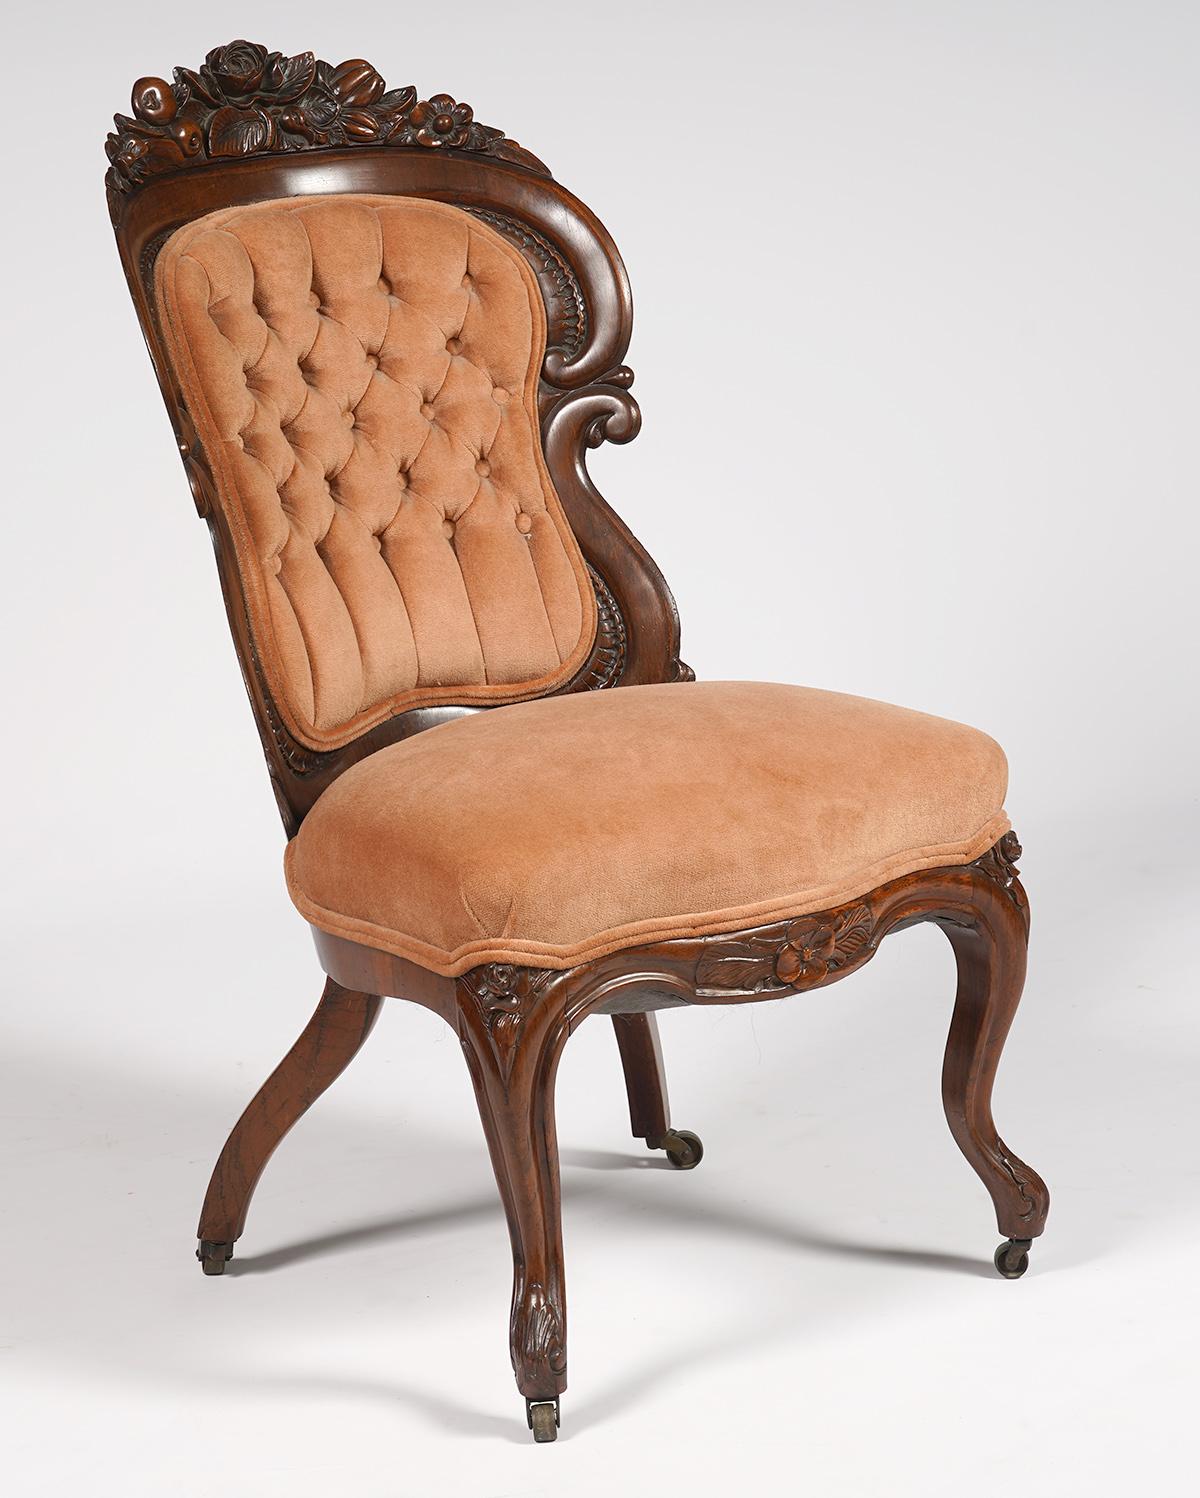 This wonderfully crafted 5 times laminated rosewood slipper chair or side chair by legendary John Henry Belter (1804-1863) is fashioned in the Henry Clay pattern. The crest is carved with flowers, fruit, filigree and a central rose above double